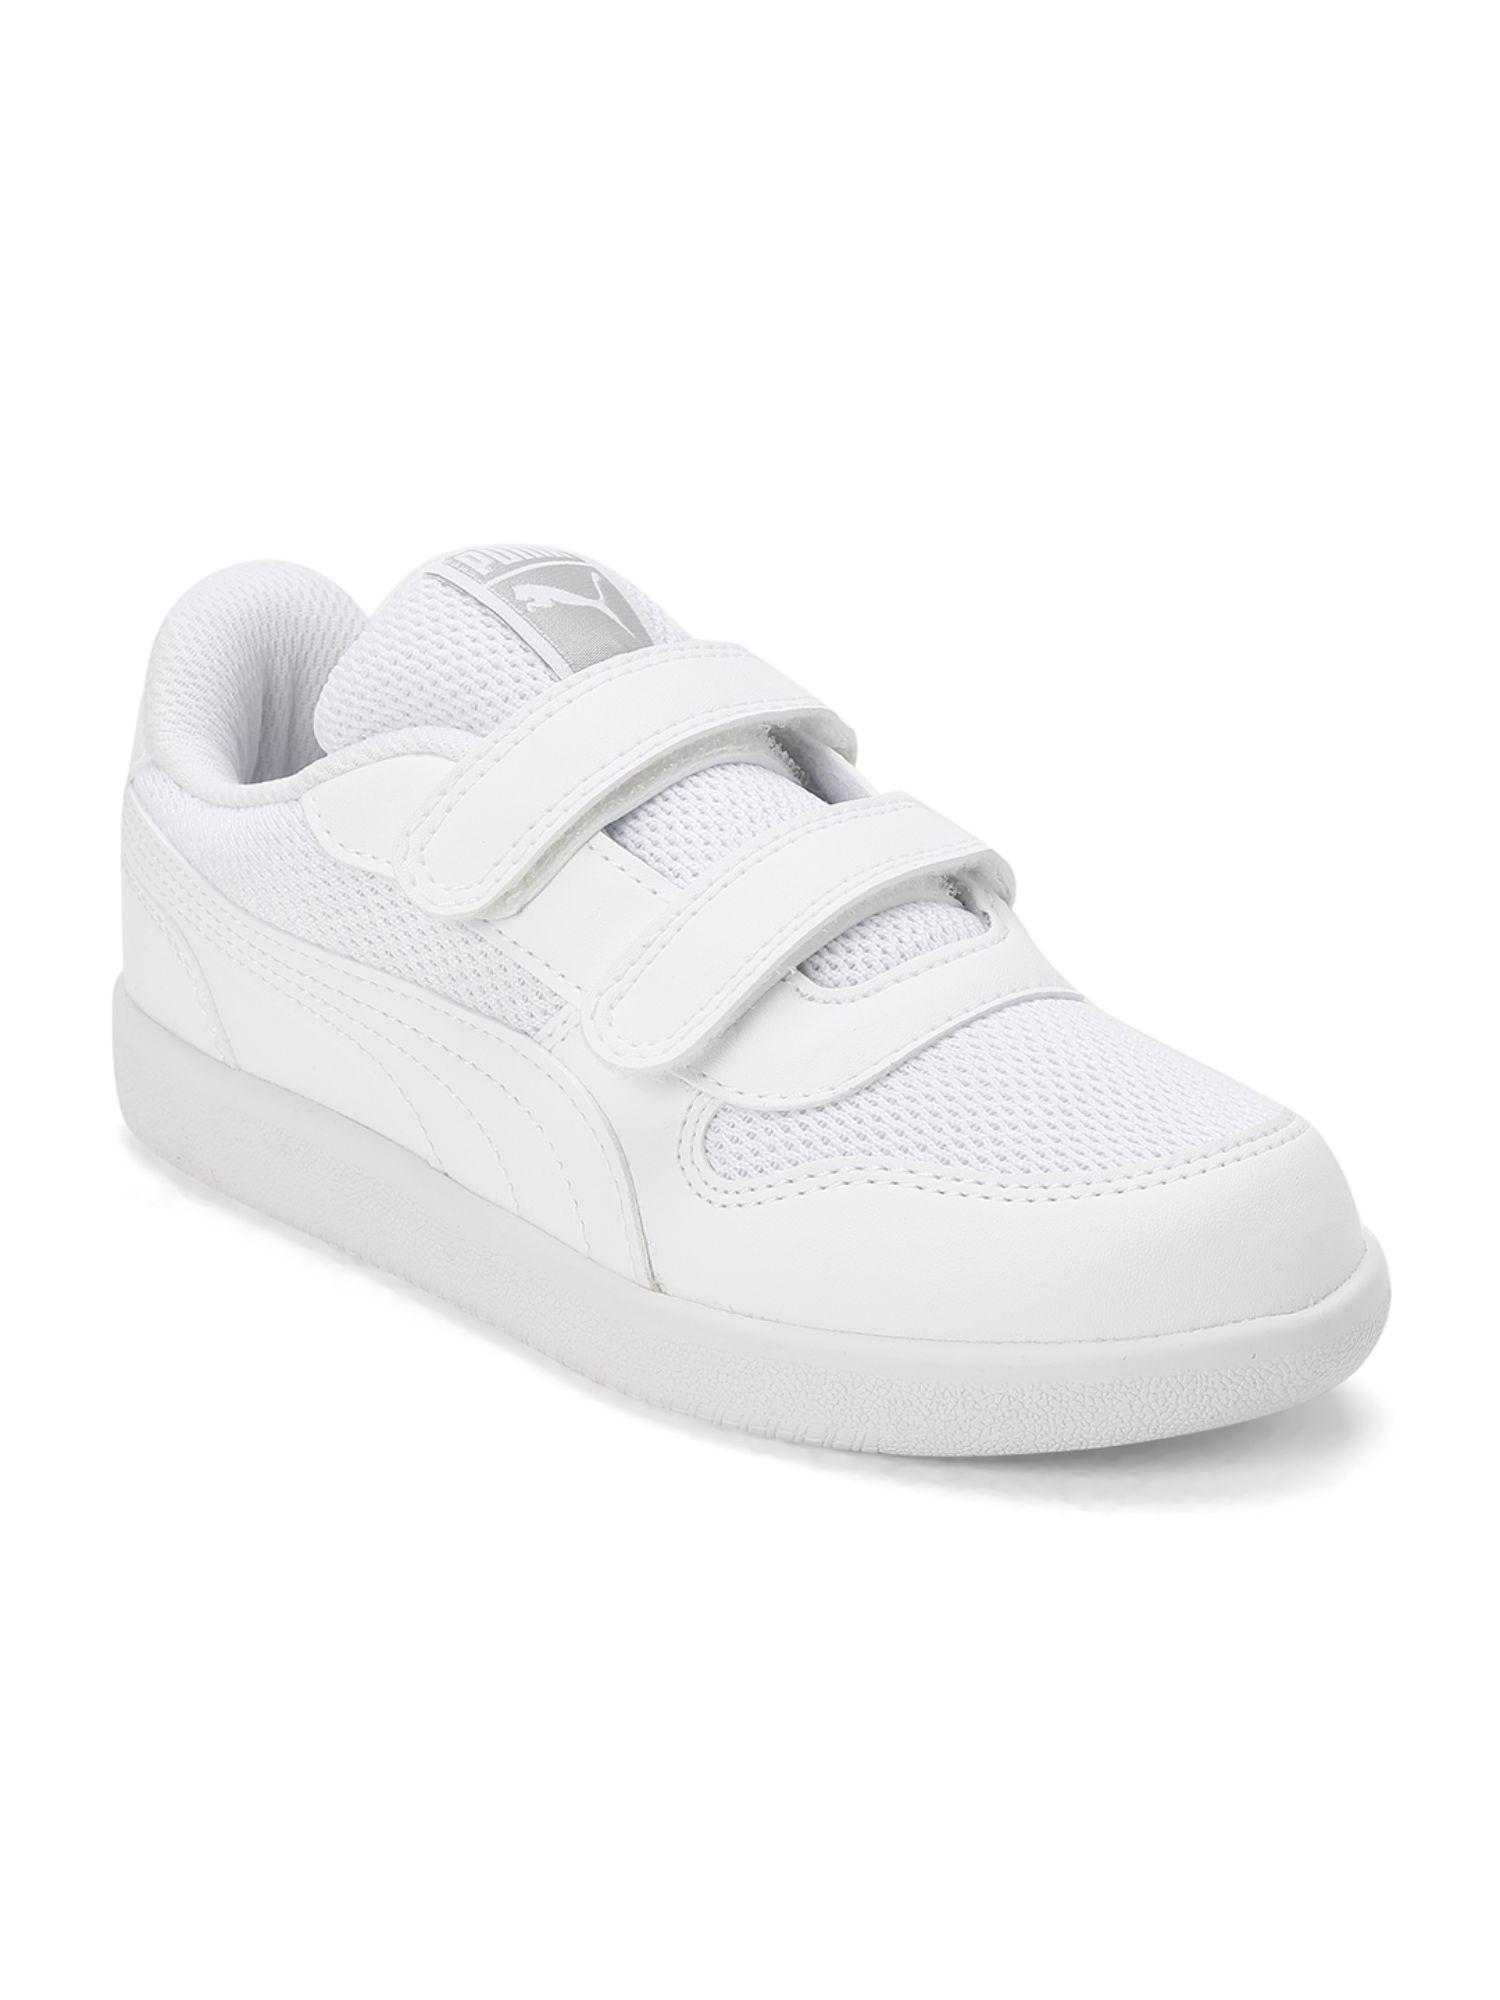 punch comfort junior kids white casual shoes